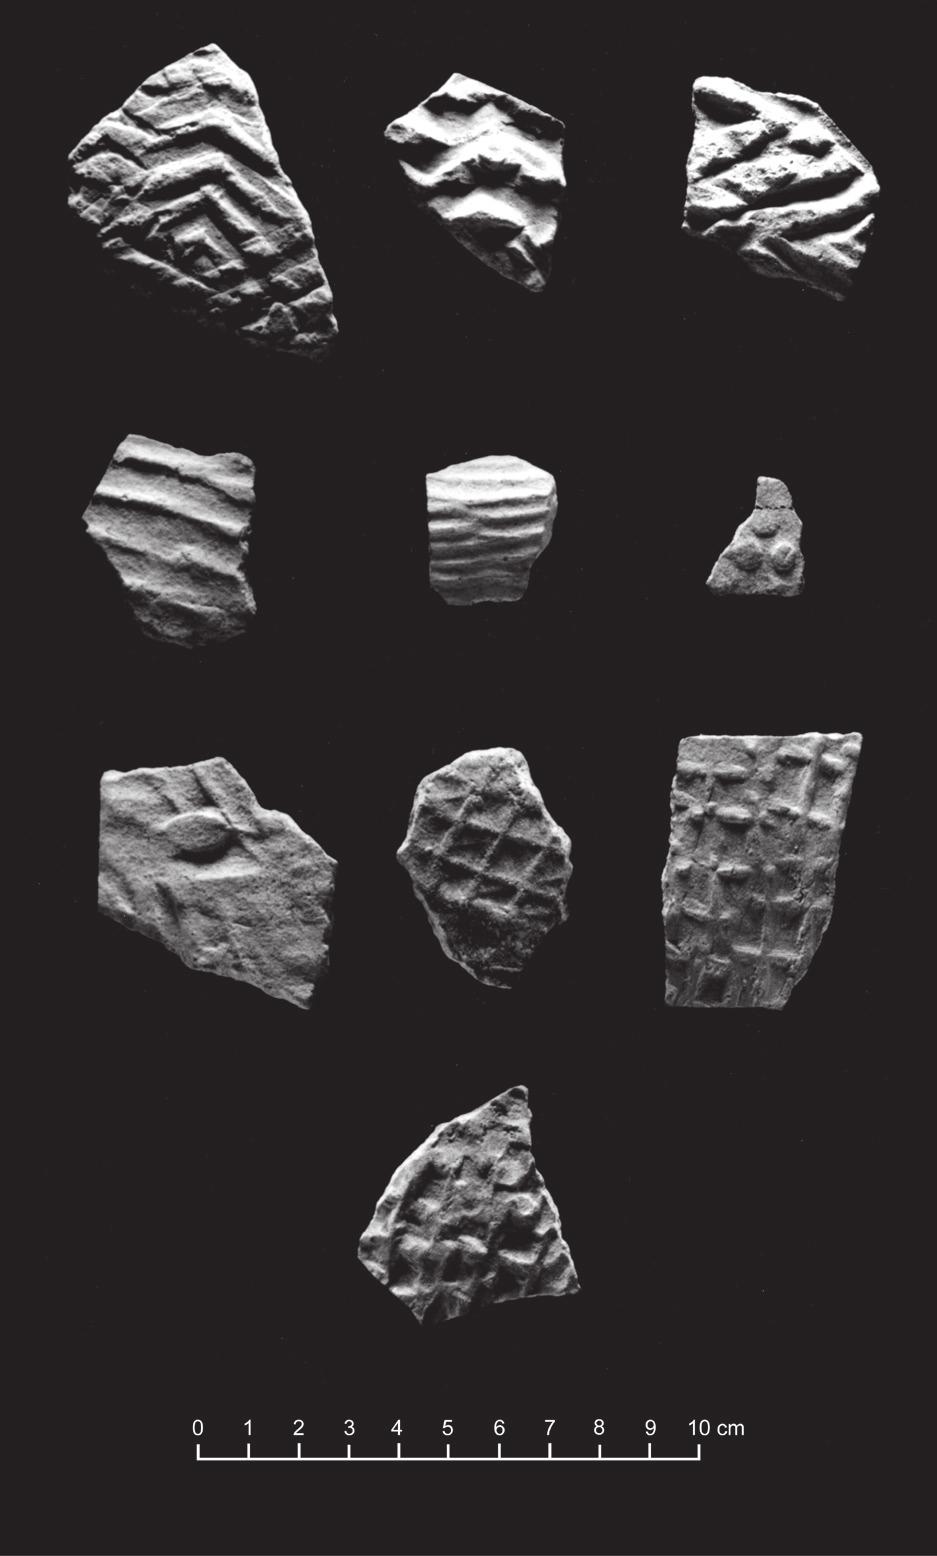 266 Geoffrey Clark a dispersed and dimpled surface. Body sherds decorated by wavy impressions exhibit greater variability in pattern.